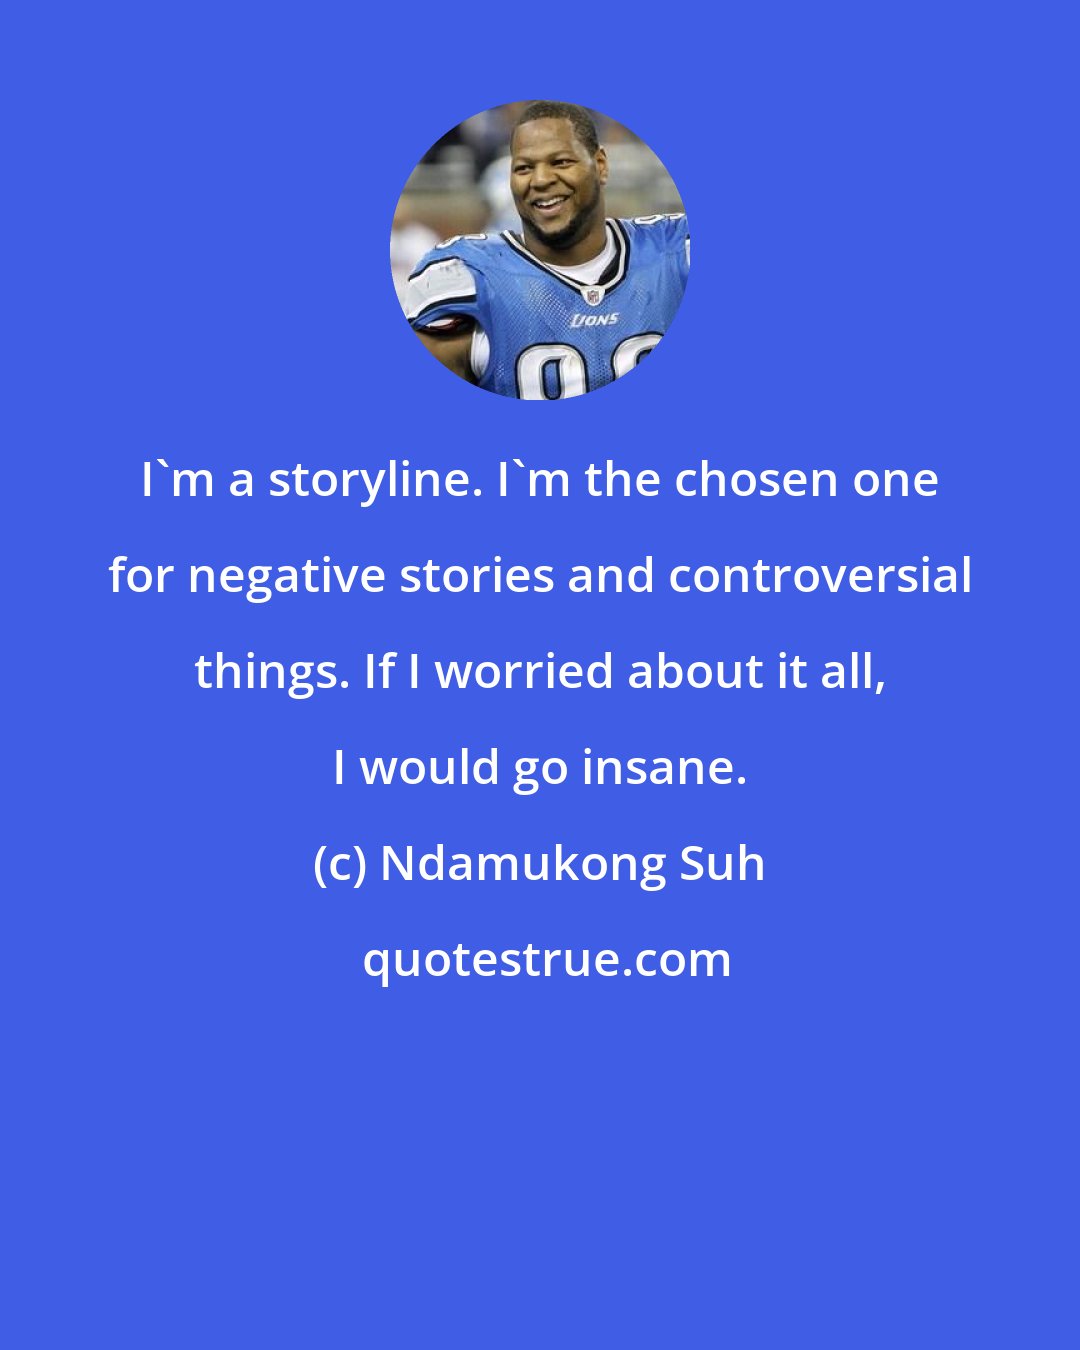 Ndamukong Suh: I'm a storyline. I'm the chosen one for negative stories and controversial things. If I worried about it all, I would go insane.